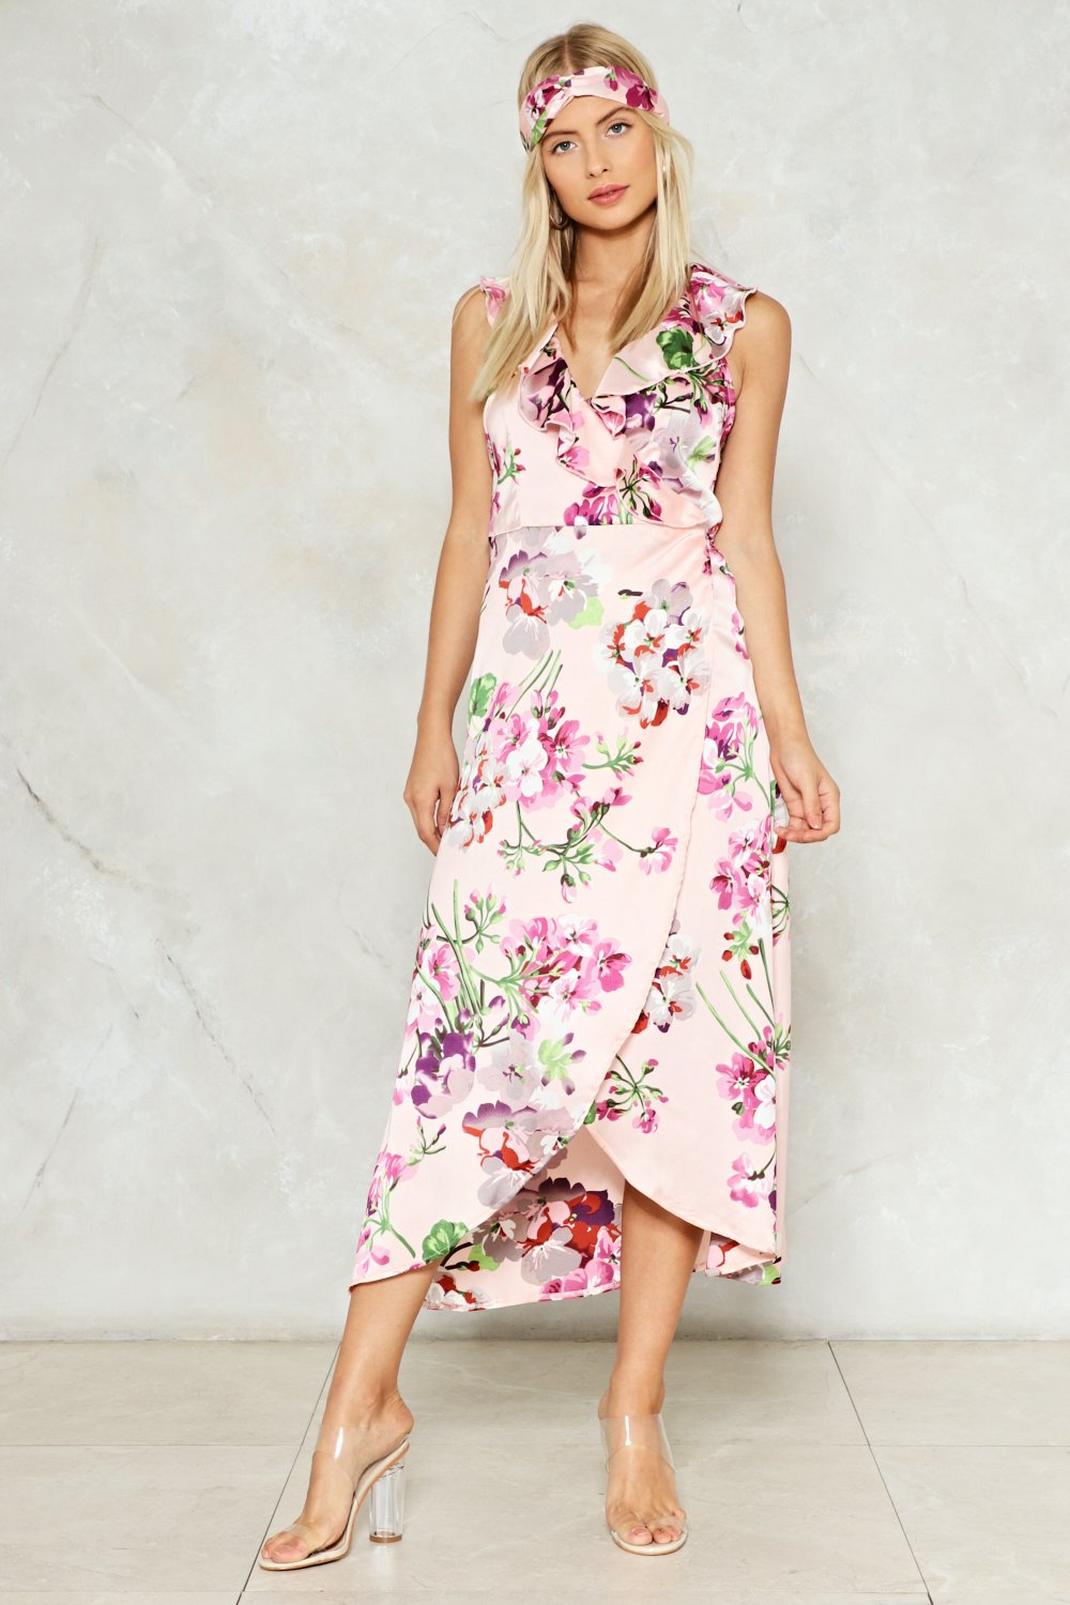 If Only Tonight We Could Sleep Floral Dress | Nasty Gal